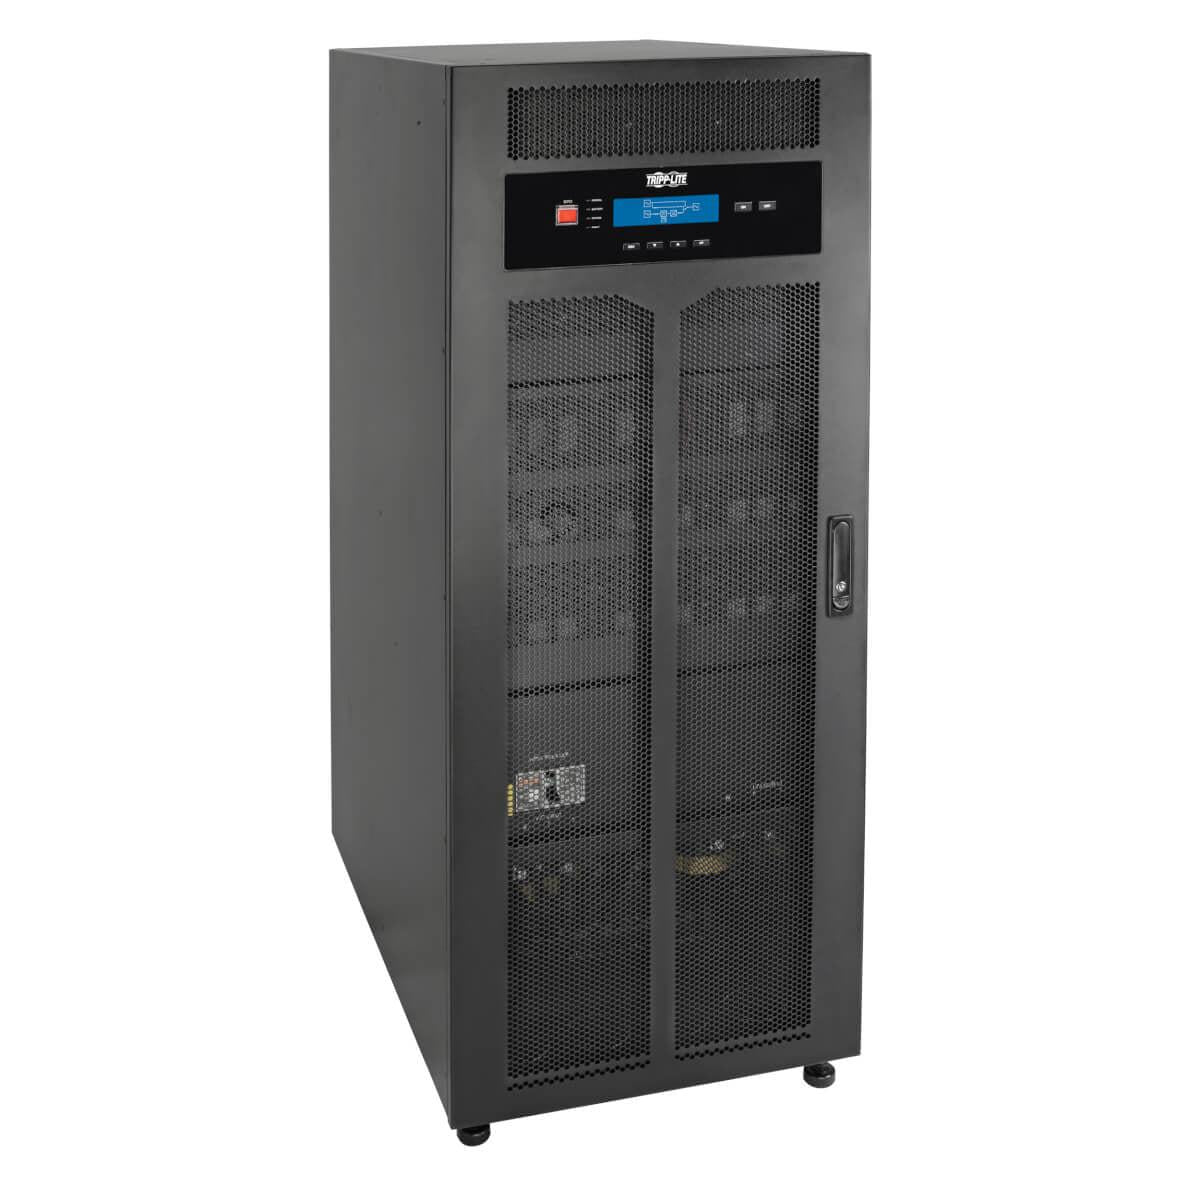 Tripp Lite Smartonline Sut Series 3-Phase 208/120V 220/127V 30Kva 30Kw On-Line Double-Conversion Ups, Tower, Extended Run, Snmp Option